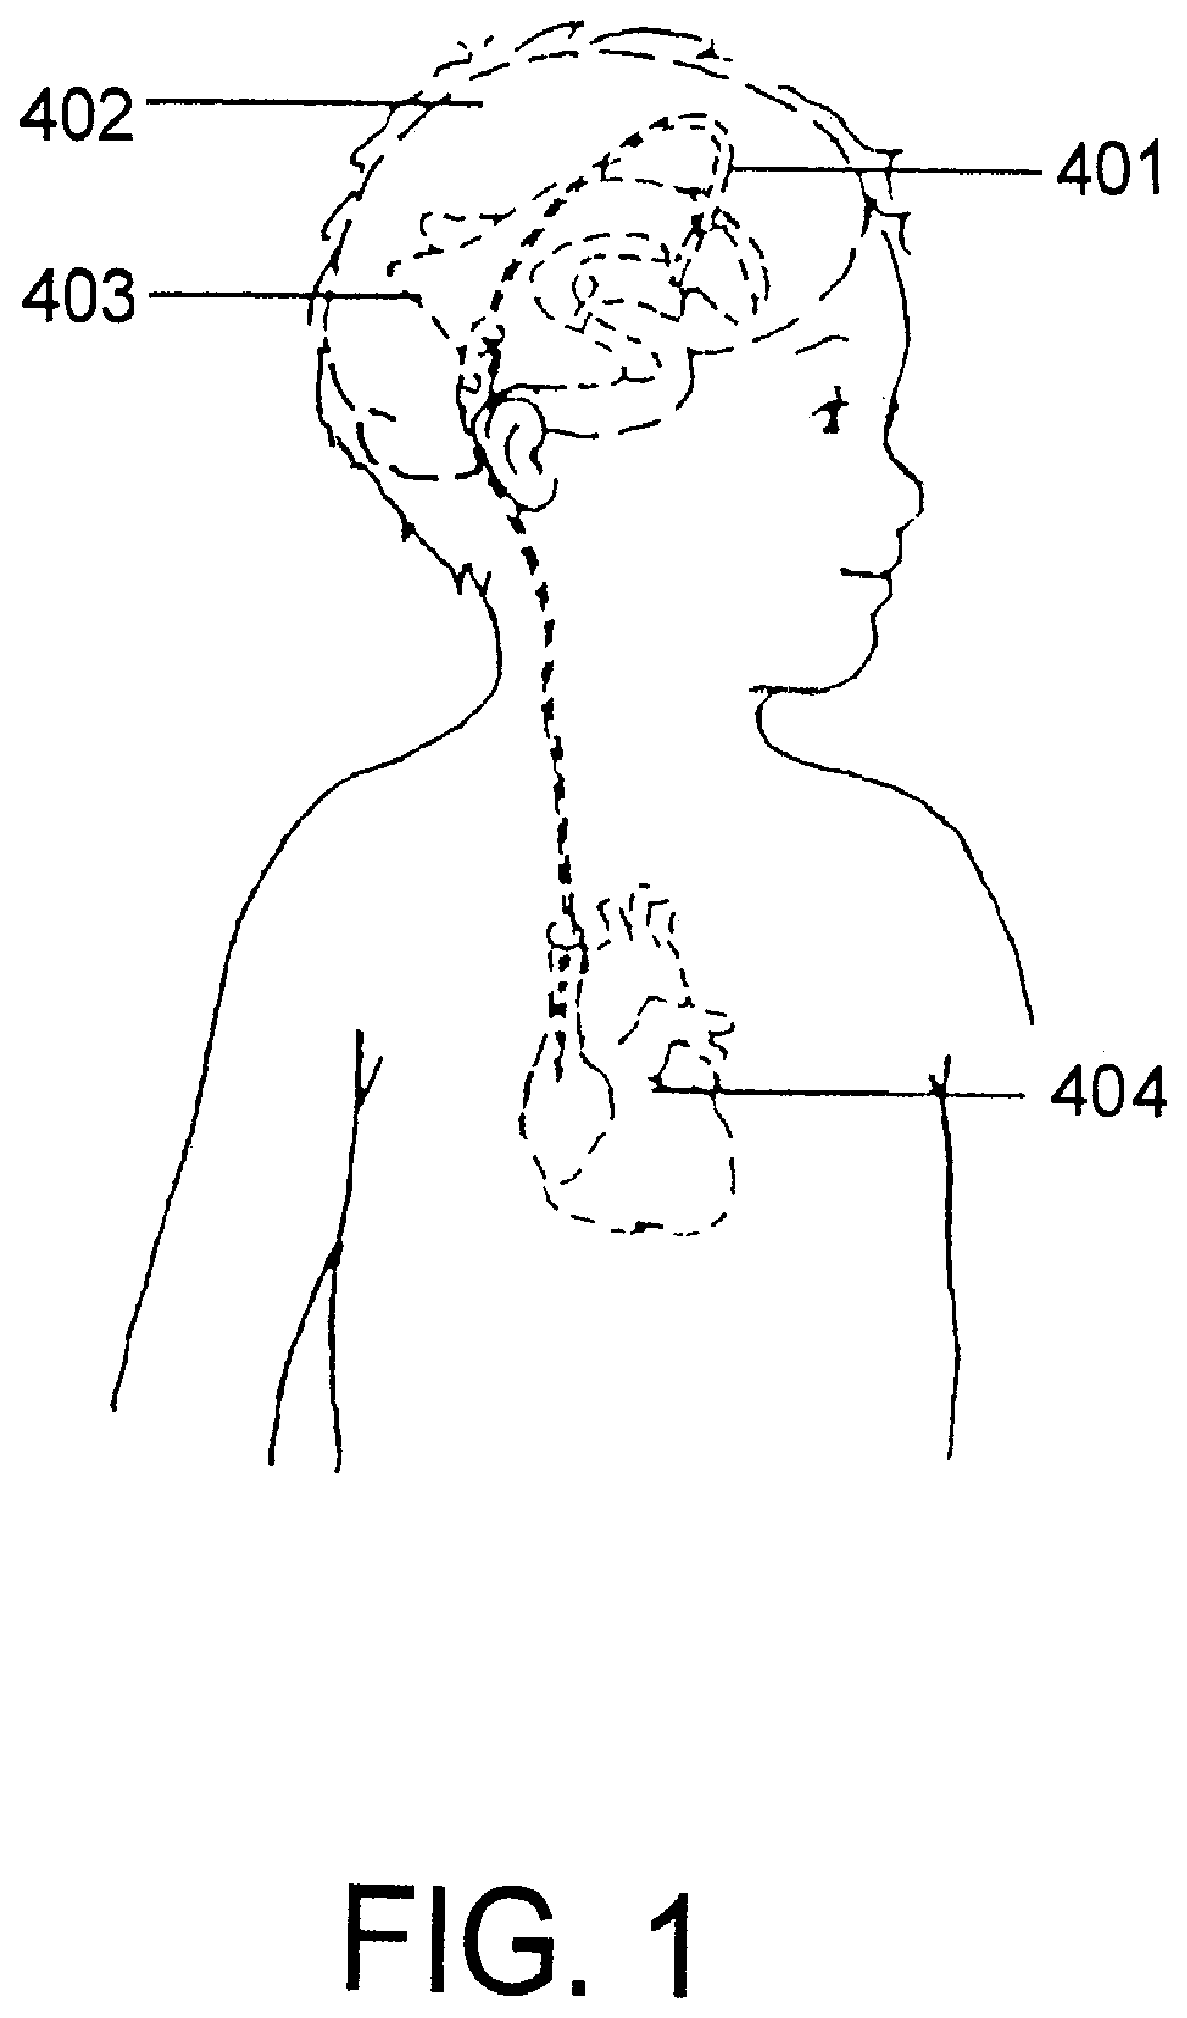 Hydrocephalus shunt arrangement and components thereof for draining cerebrospinal fluid in a patient having hydrocephalus